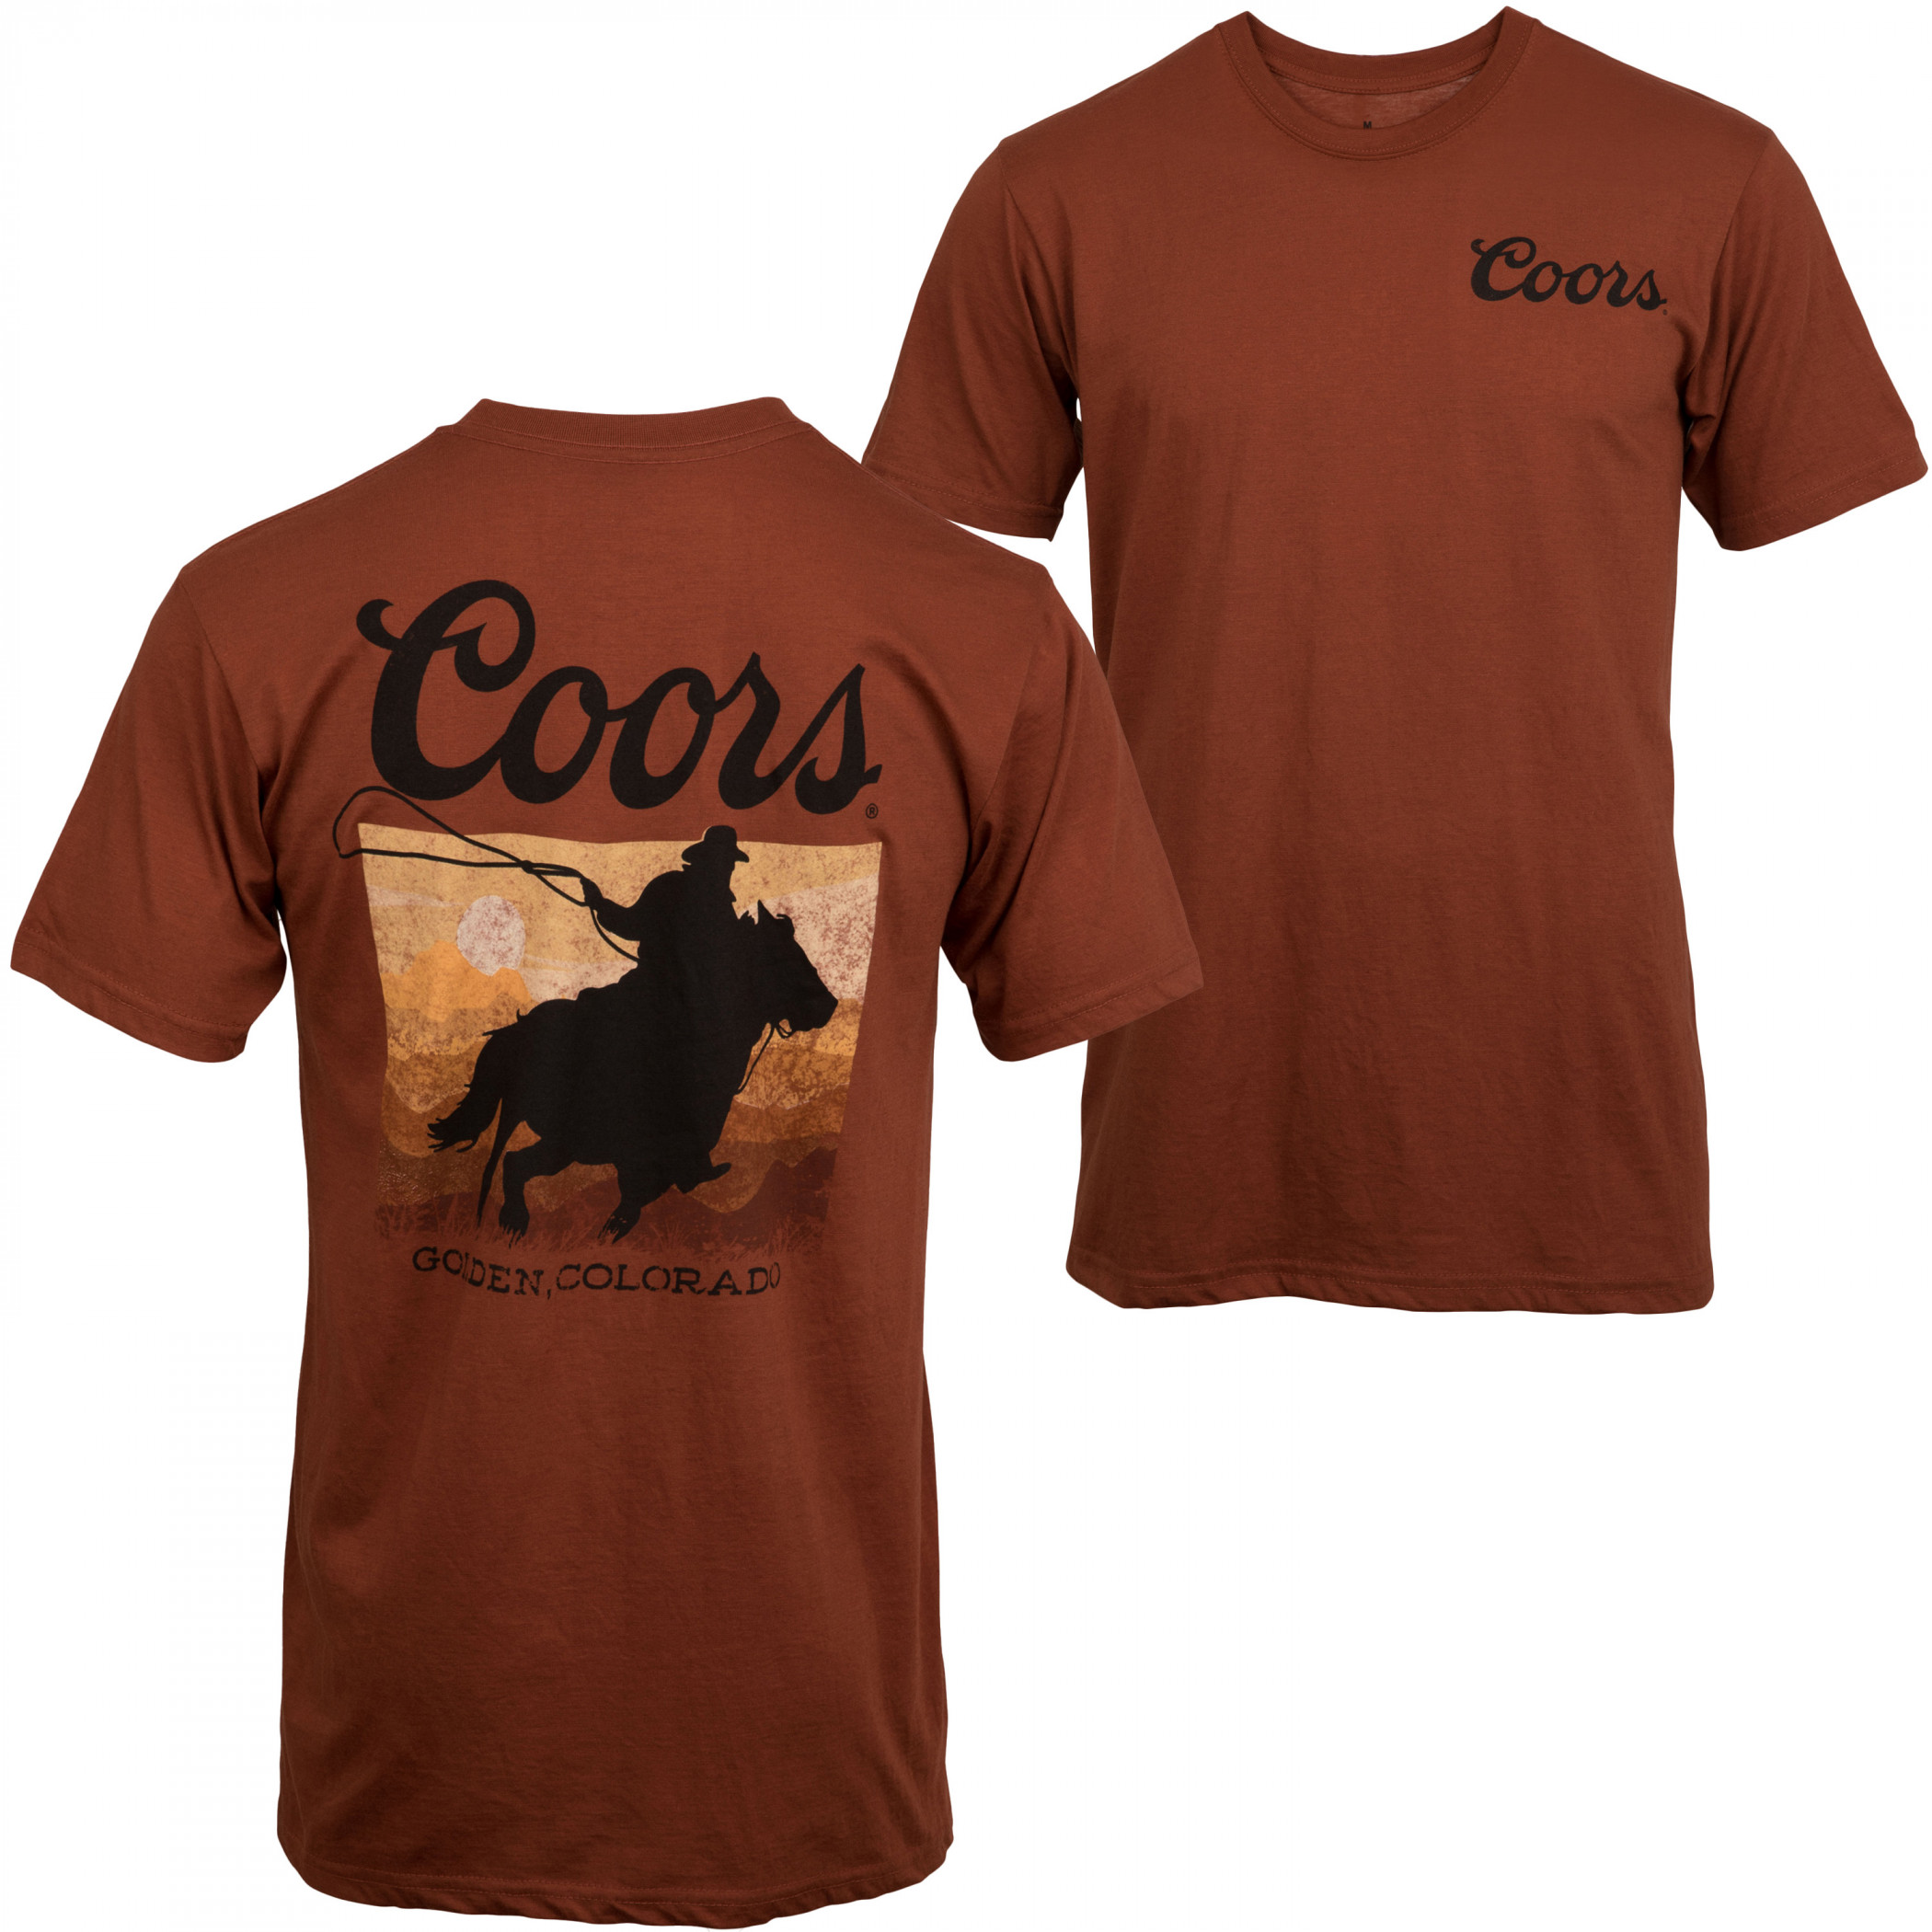 Coors Sunset Rider Front and Back Print T-Shirt